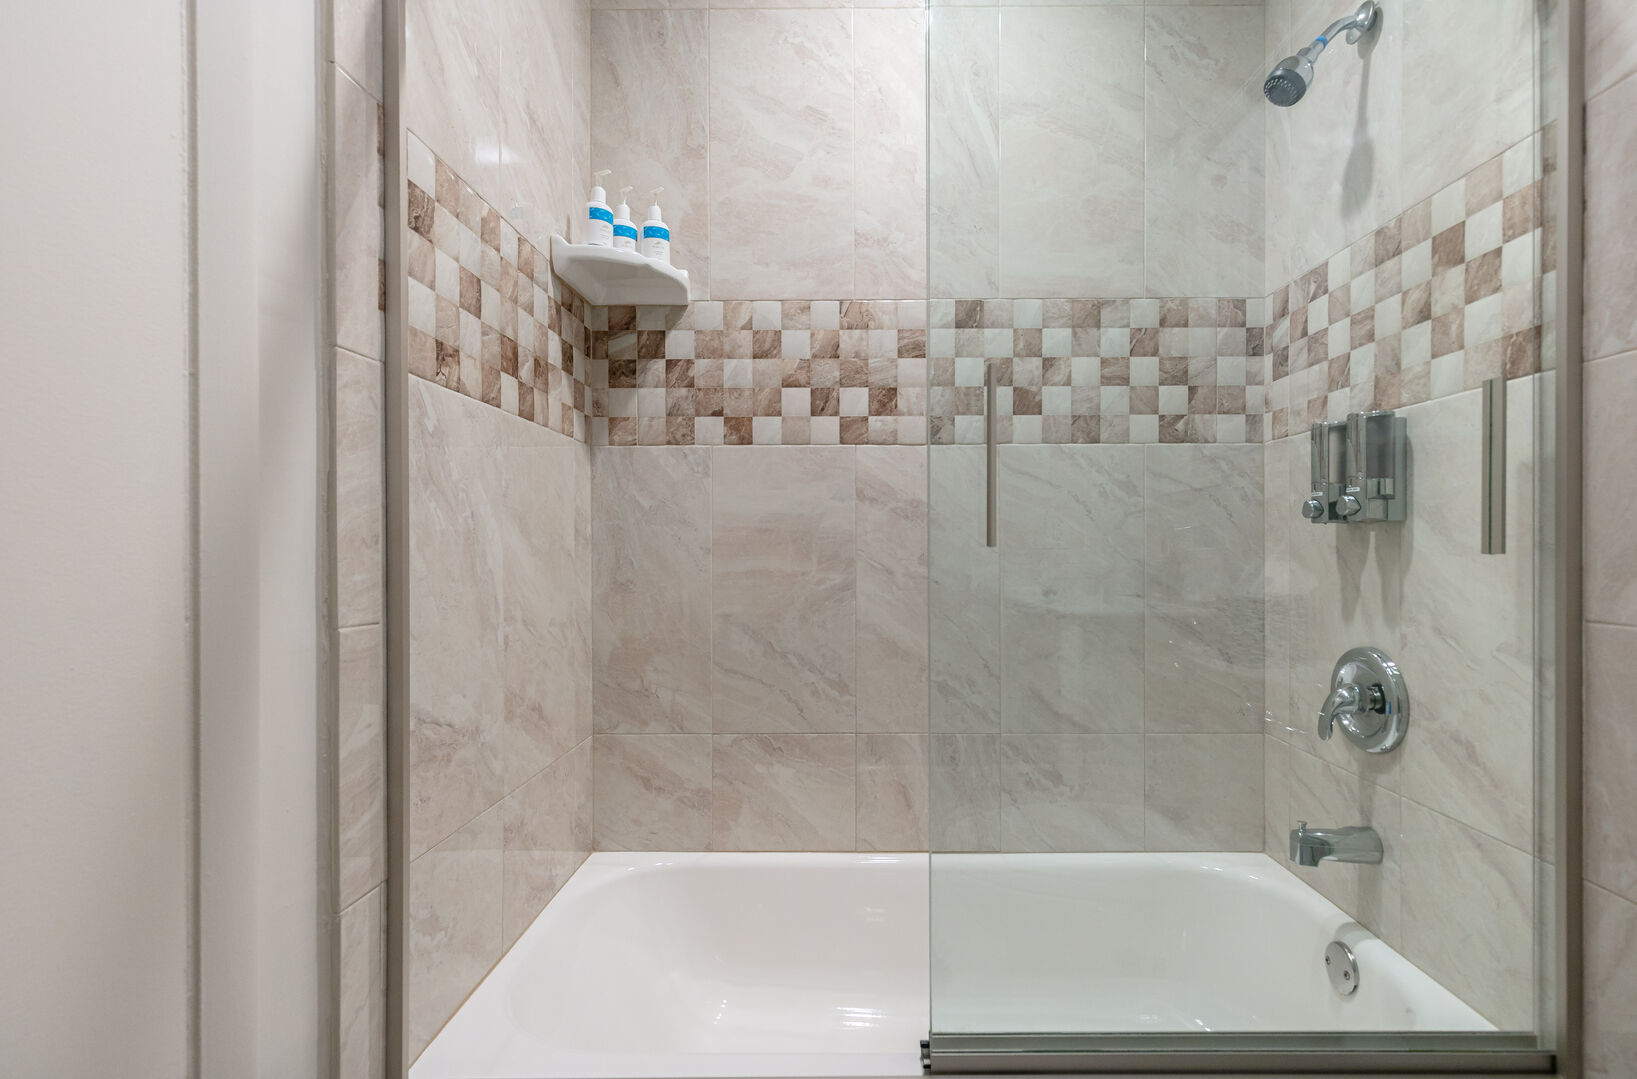 There's a tub/shower combo in the master bathroom, with beautiful tiles on the walls.